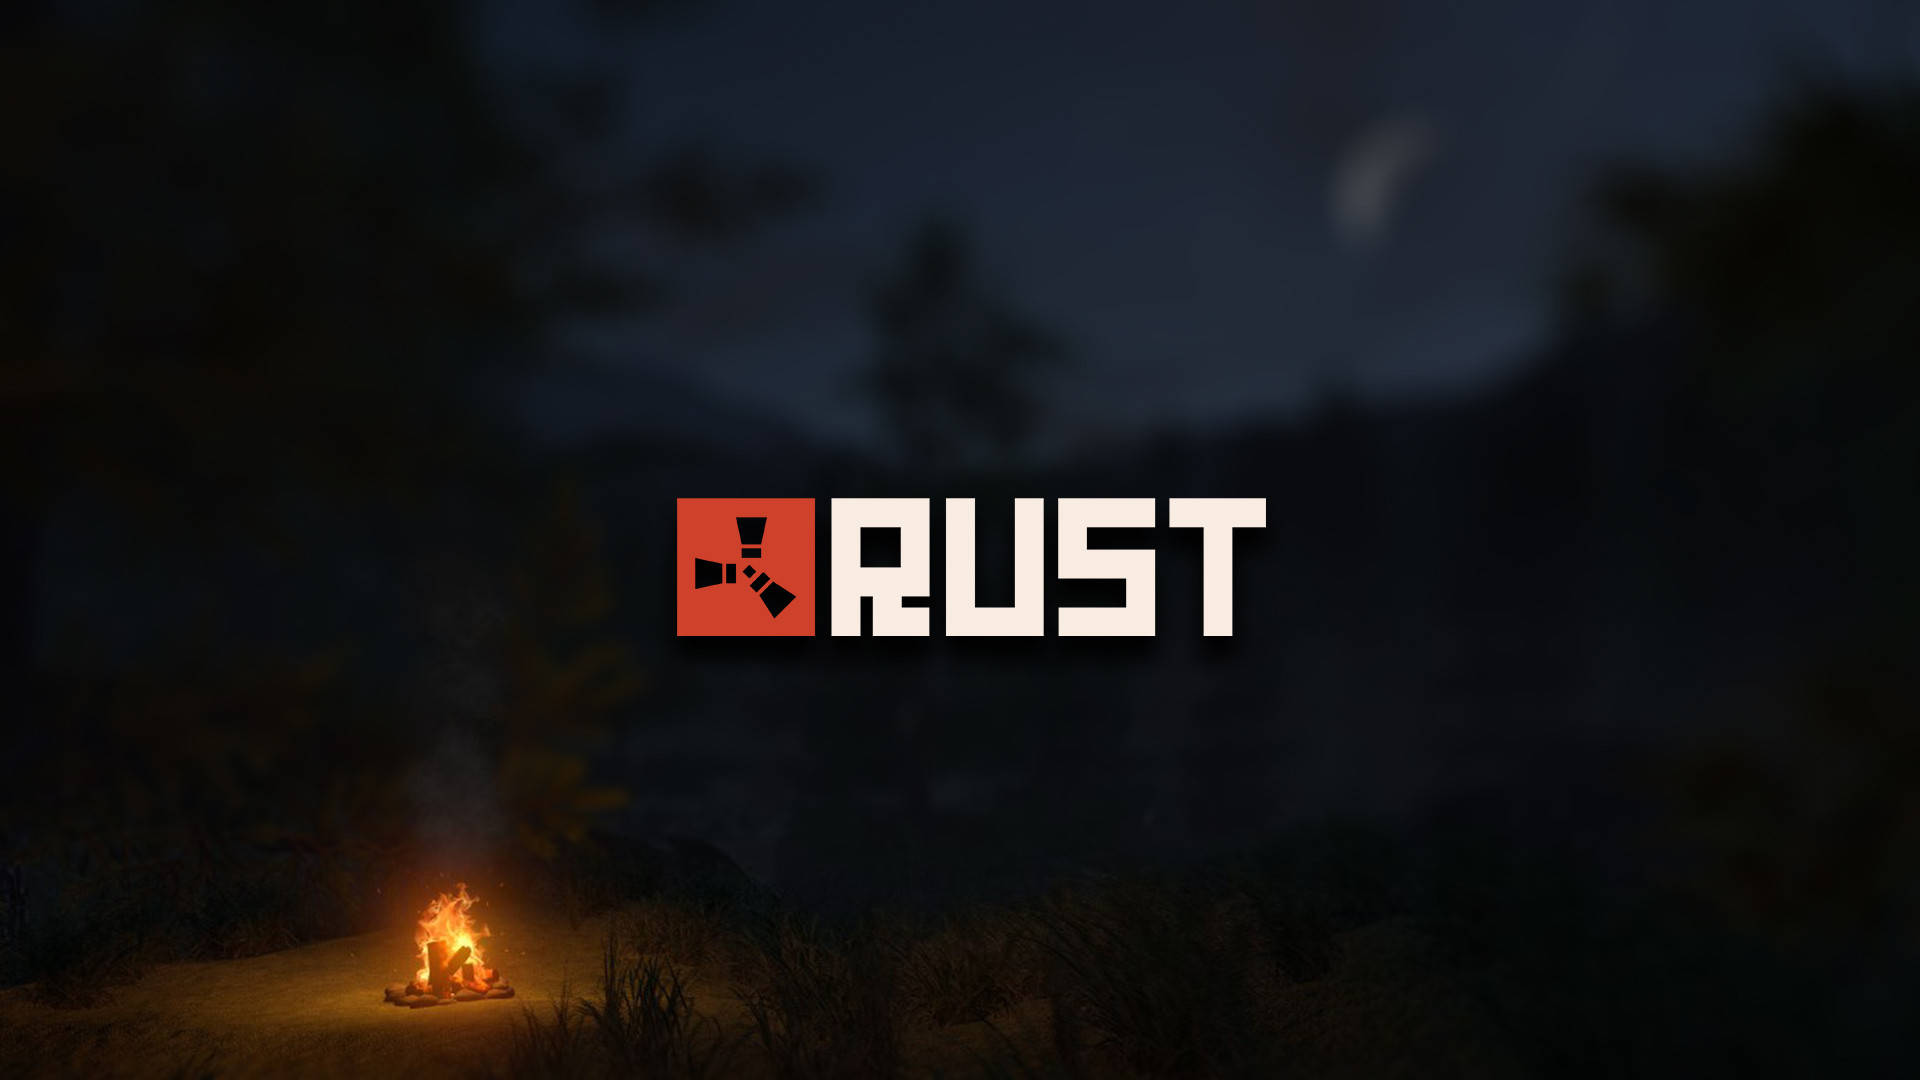 Highlighting The Rust Logo - A Glowing Campfire Theme